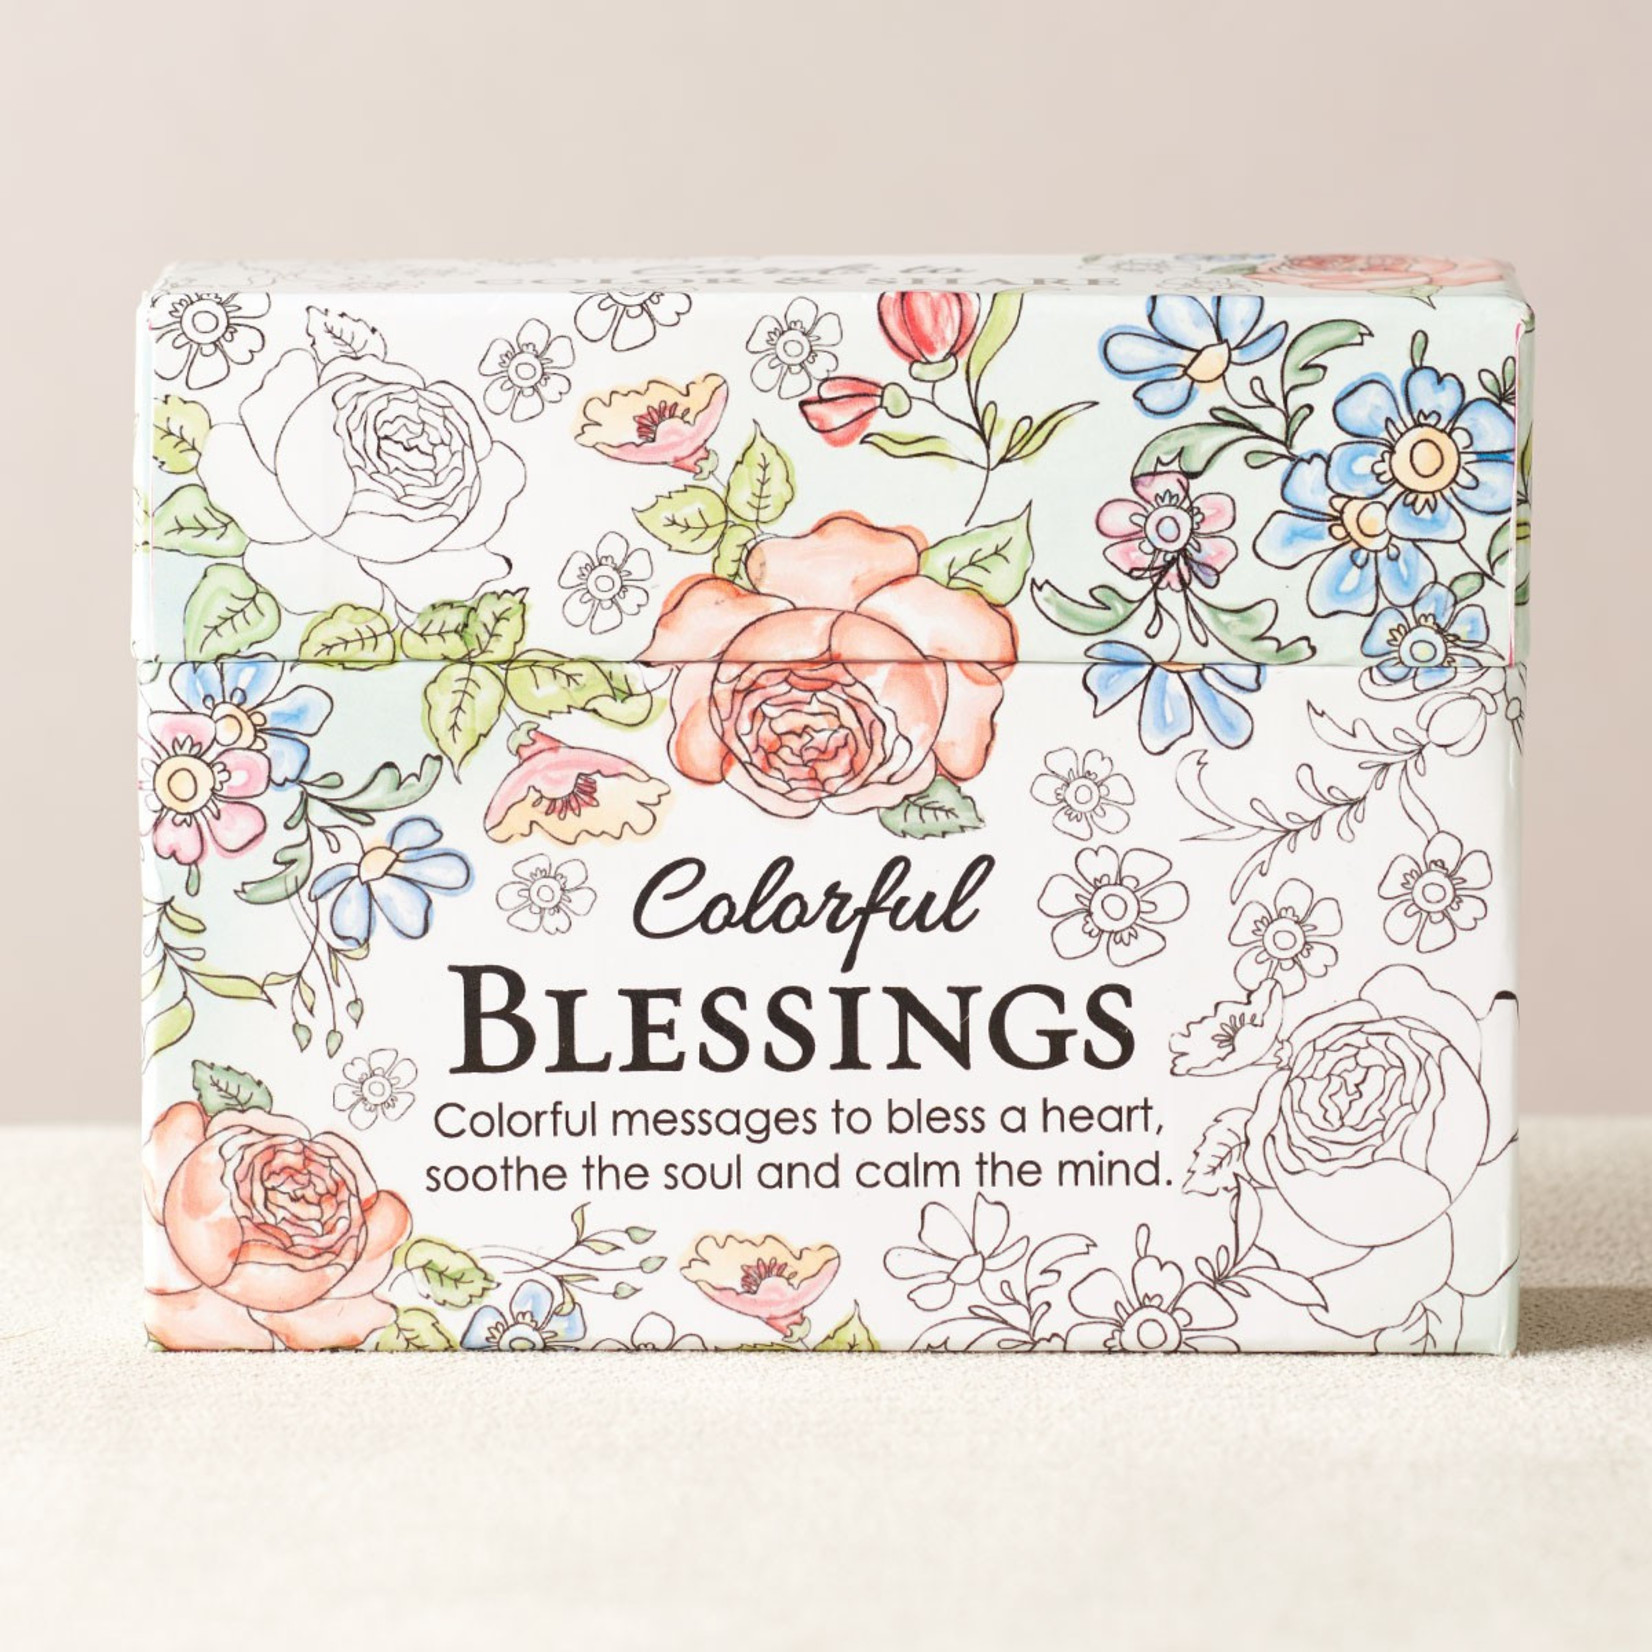 Christian Art Gifts Colorful Blessings Coloring Cards